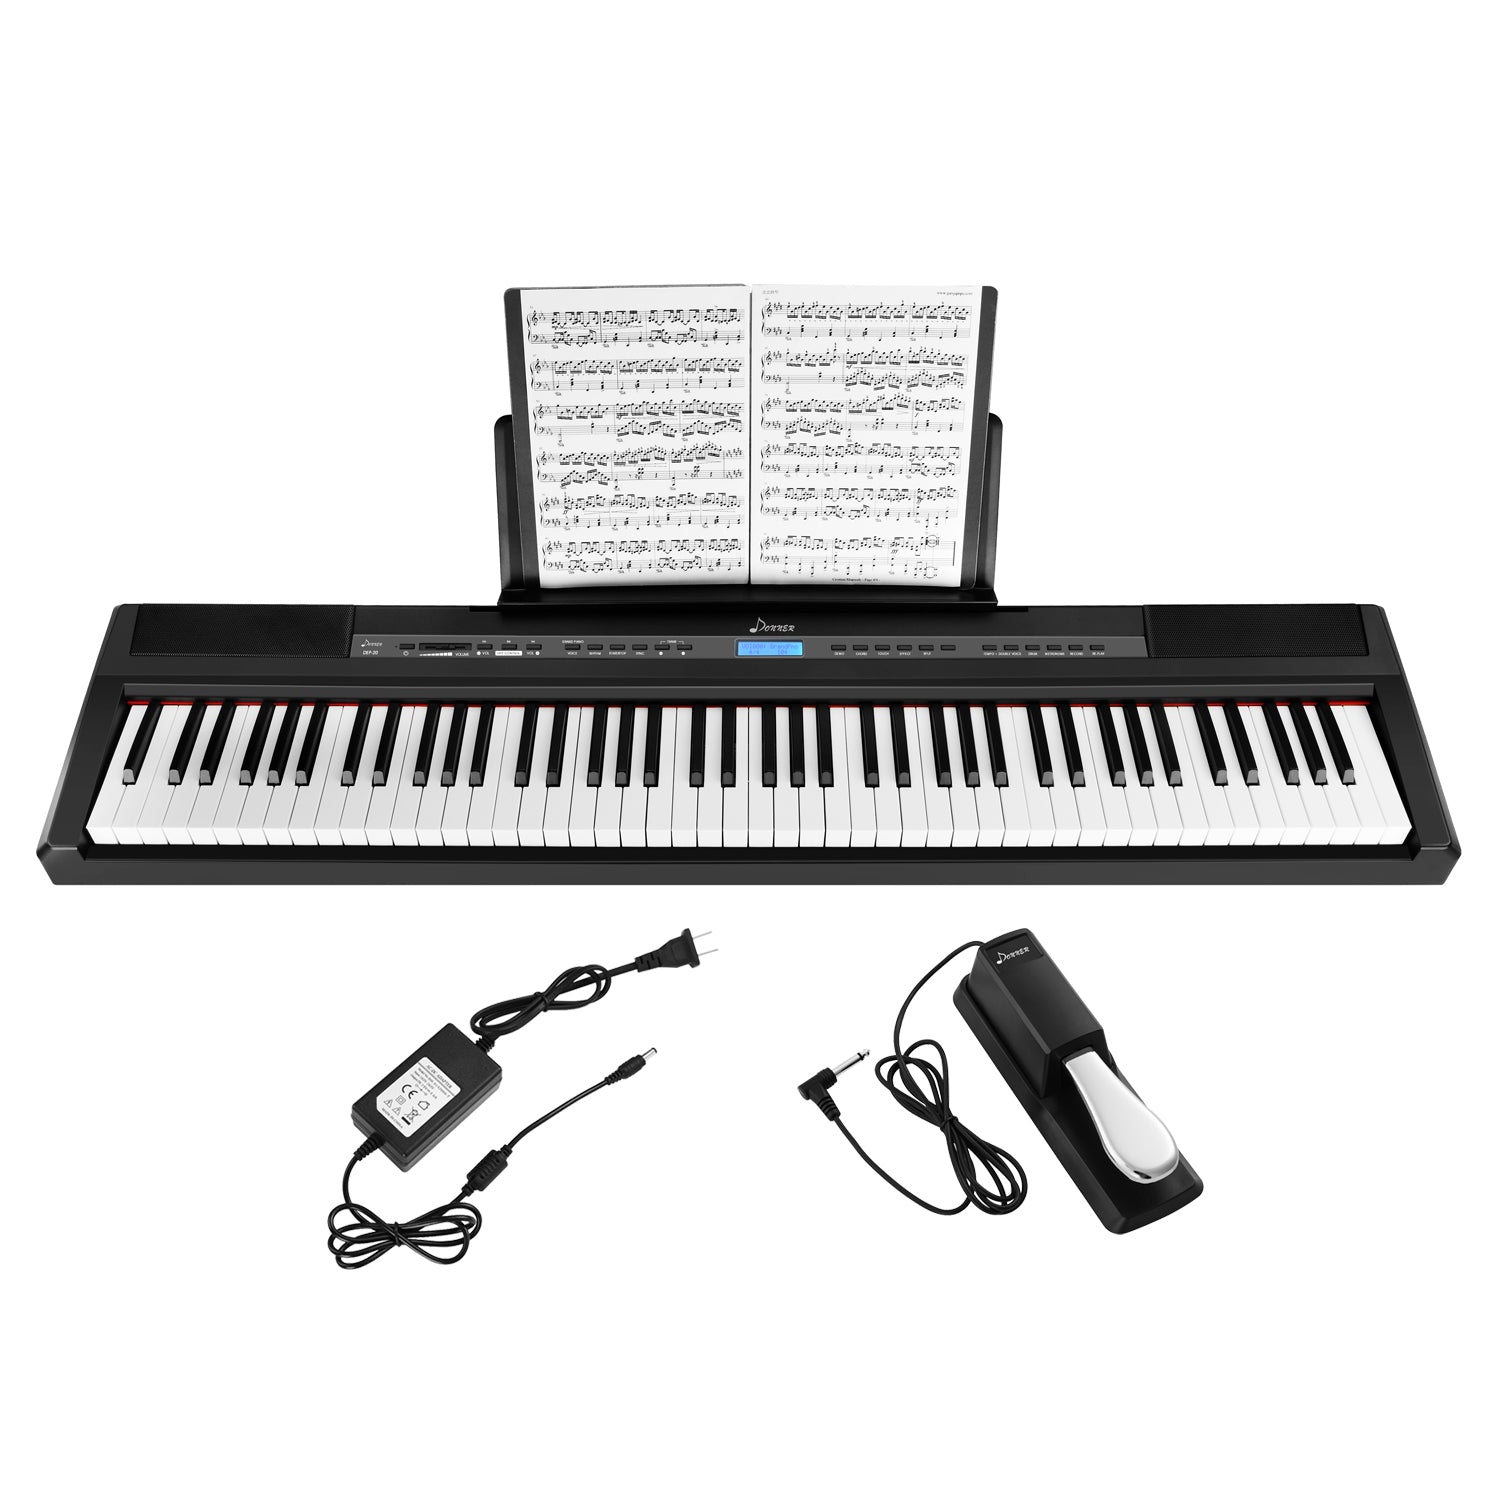 

Donner DEP-20 Portable 88 Key Weighted Digital Piano with Sustain Pedal for Beginner